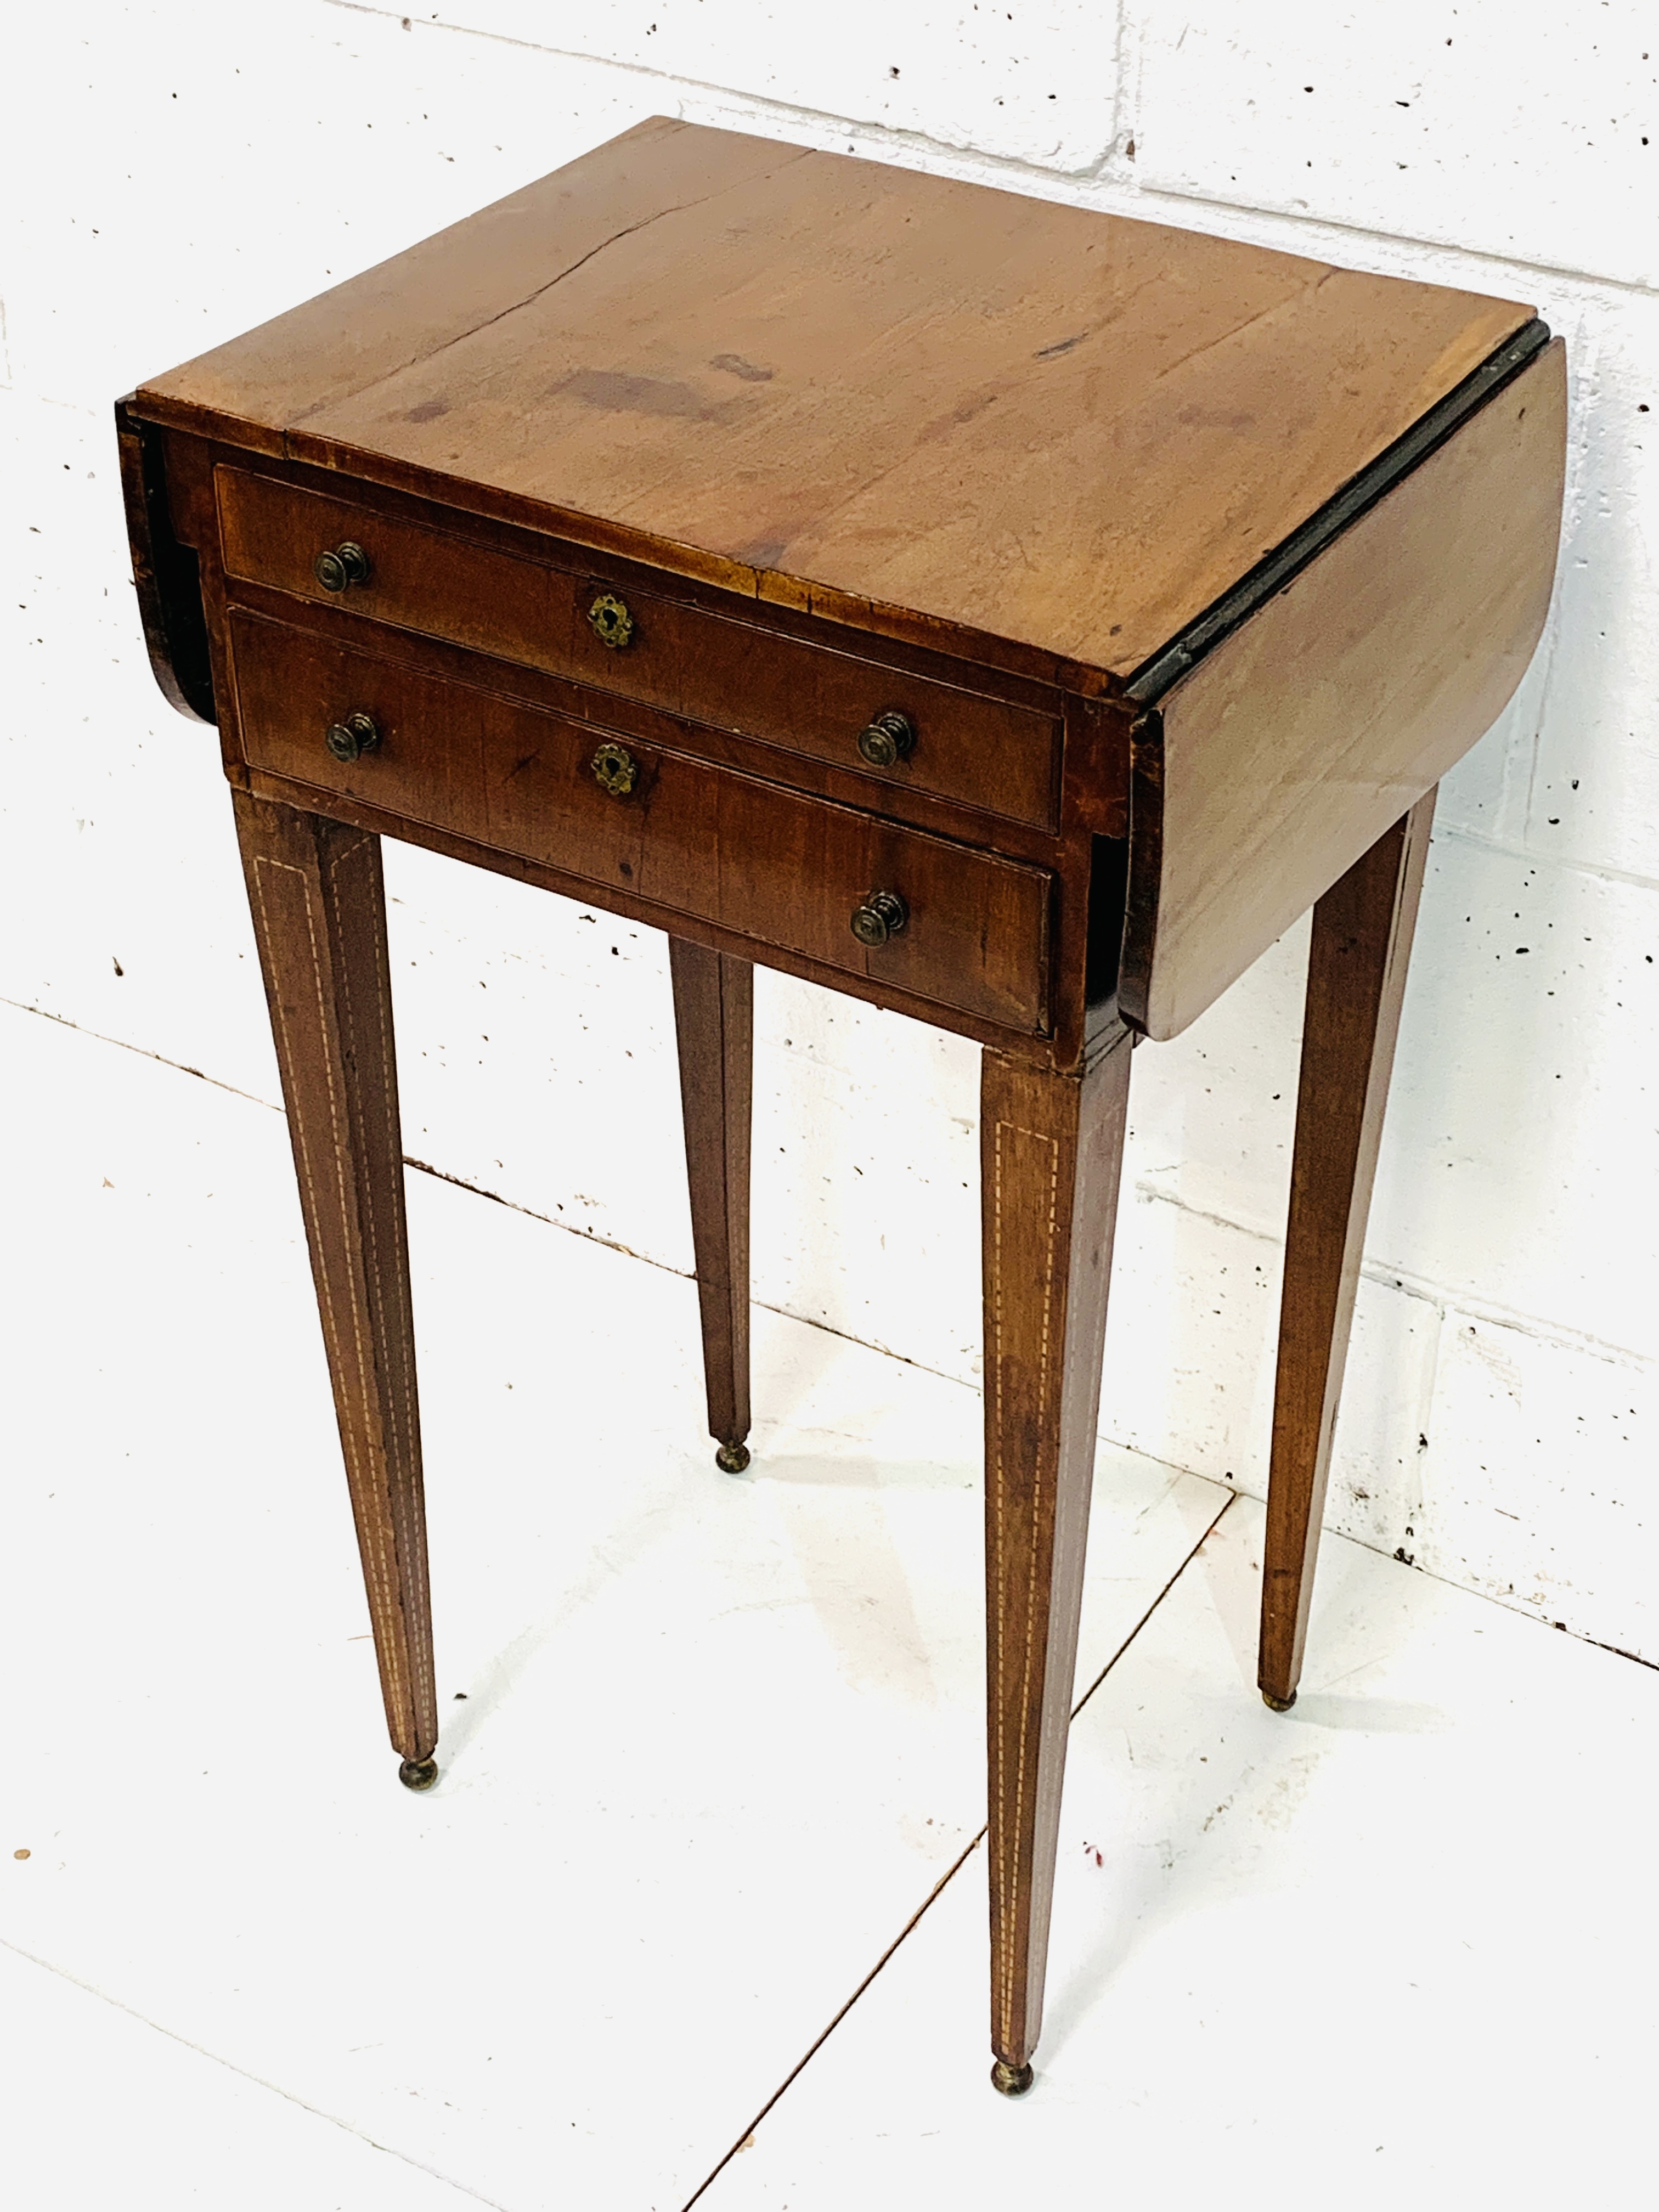 Regency inlaid mahogany small drop side table - Image 2 of 5